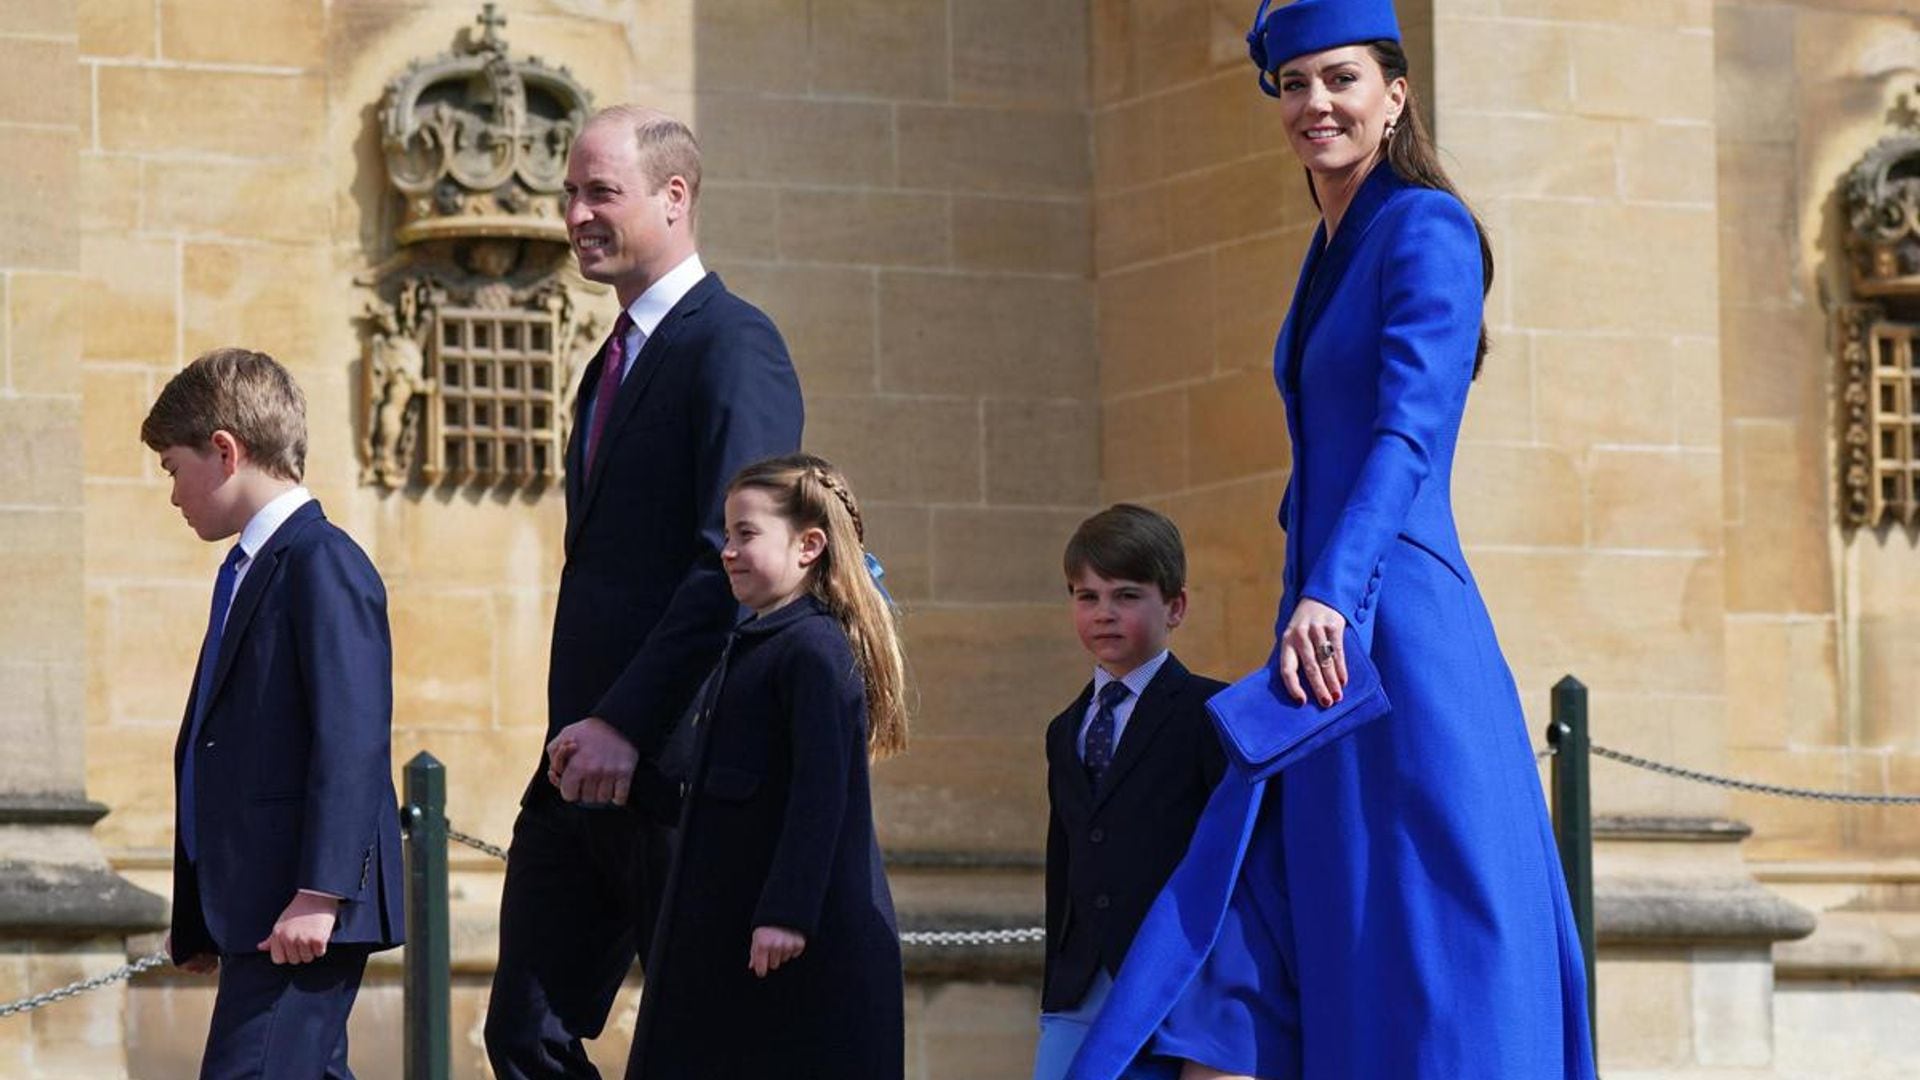 Will the Prince and Princess of Wales celebrate Easter with the royal family this year?